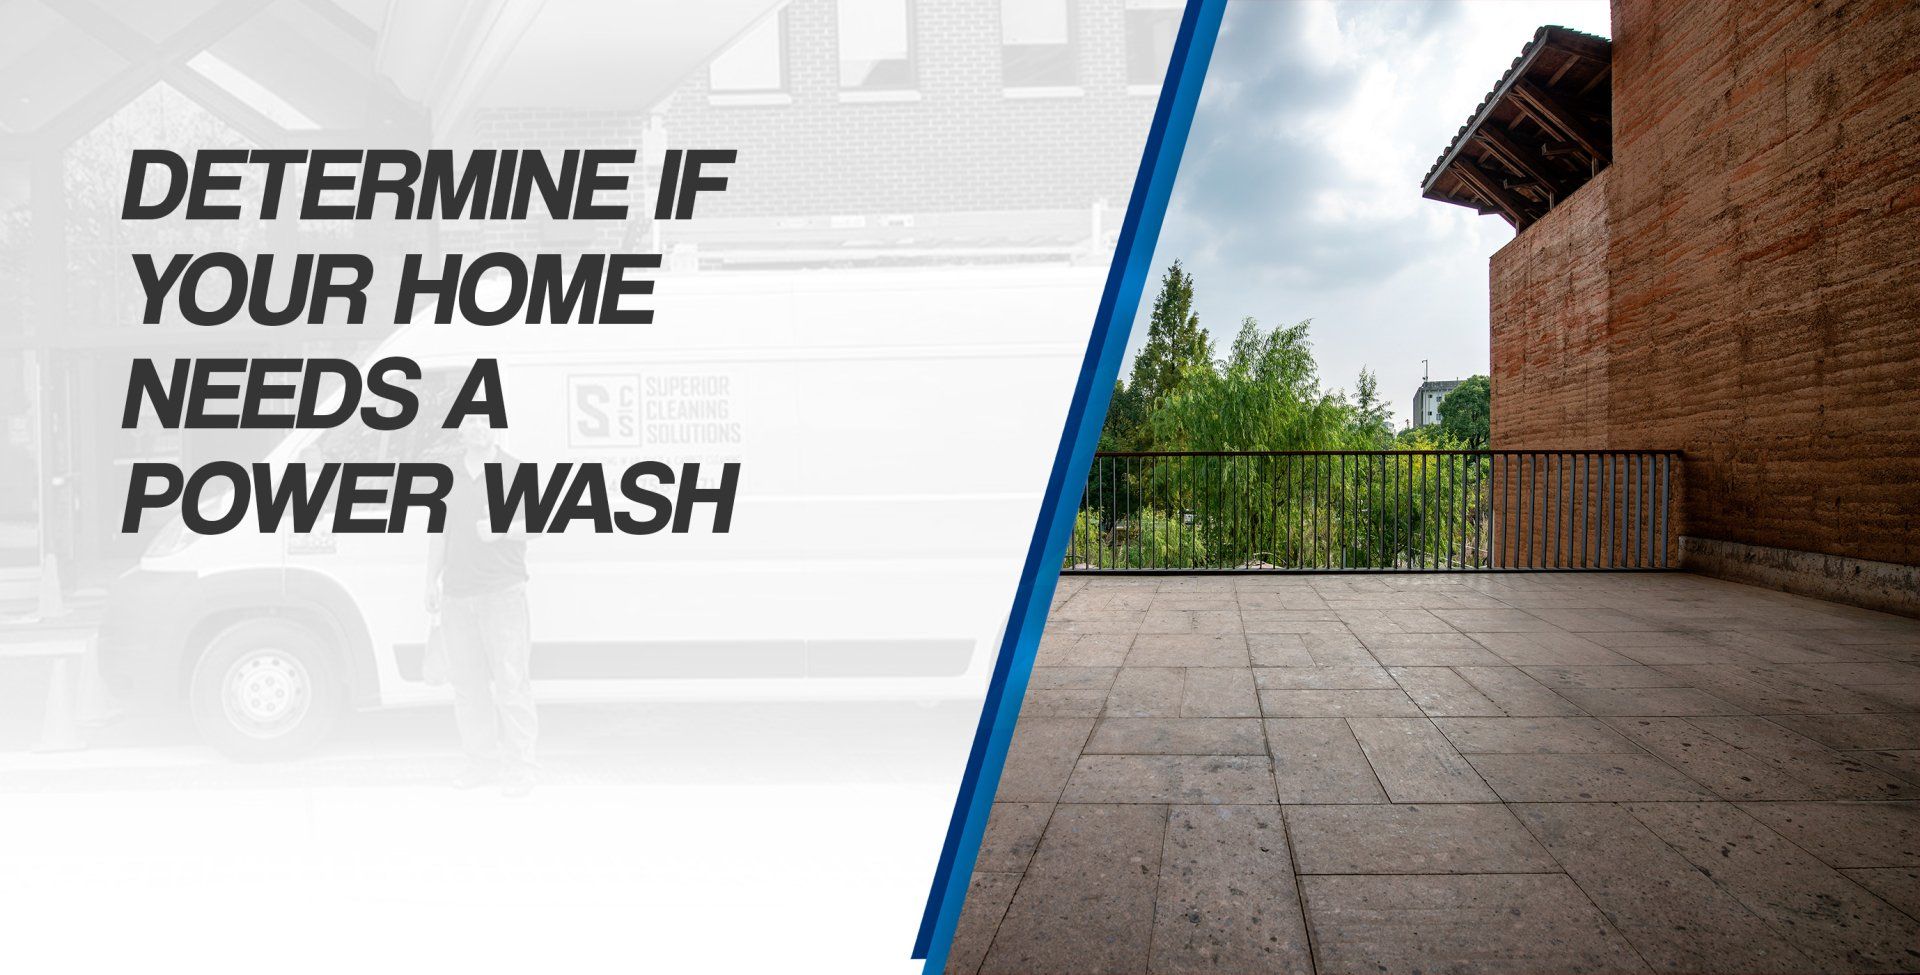 How You Can Determine if Your Home Needs a Power Wash